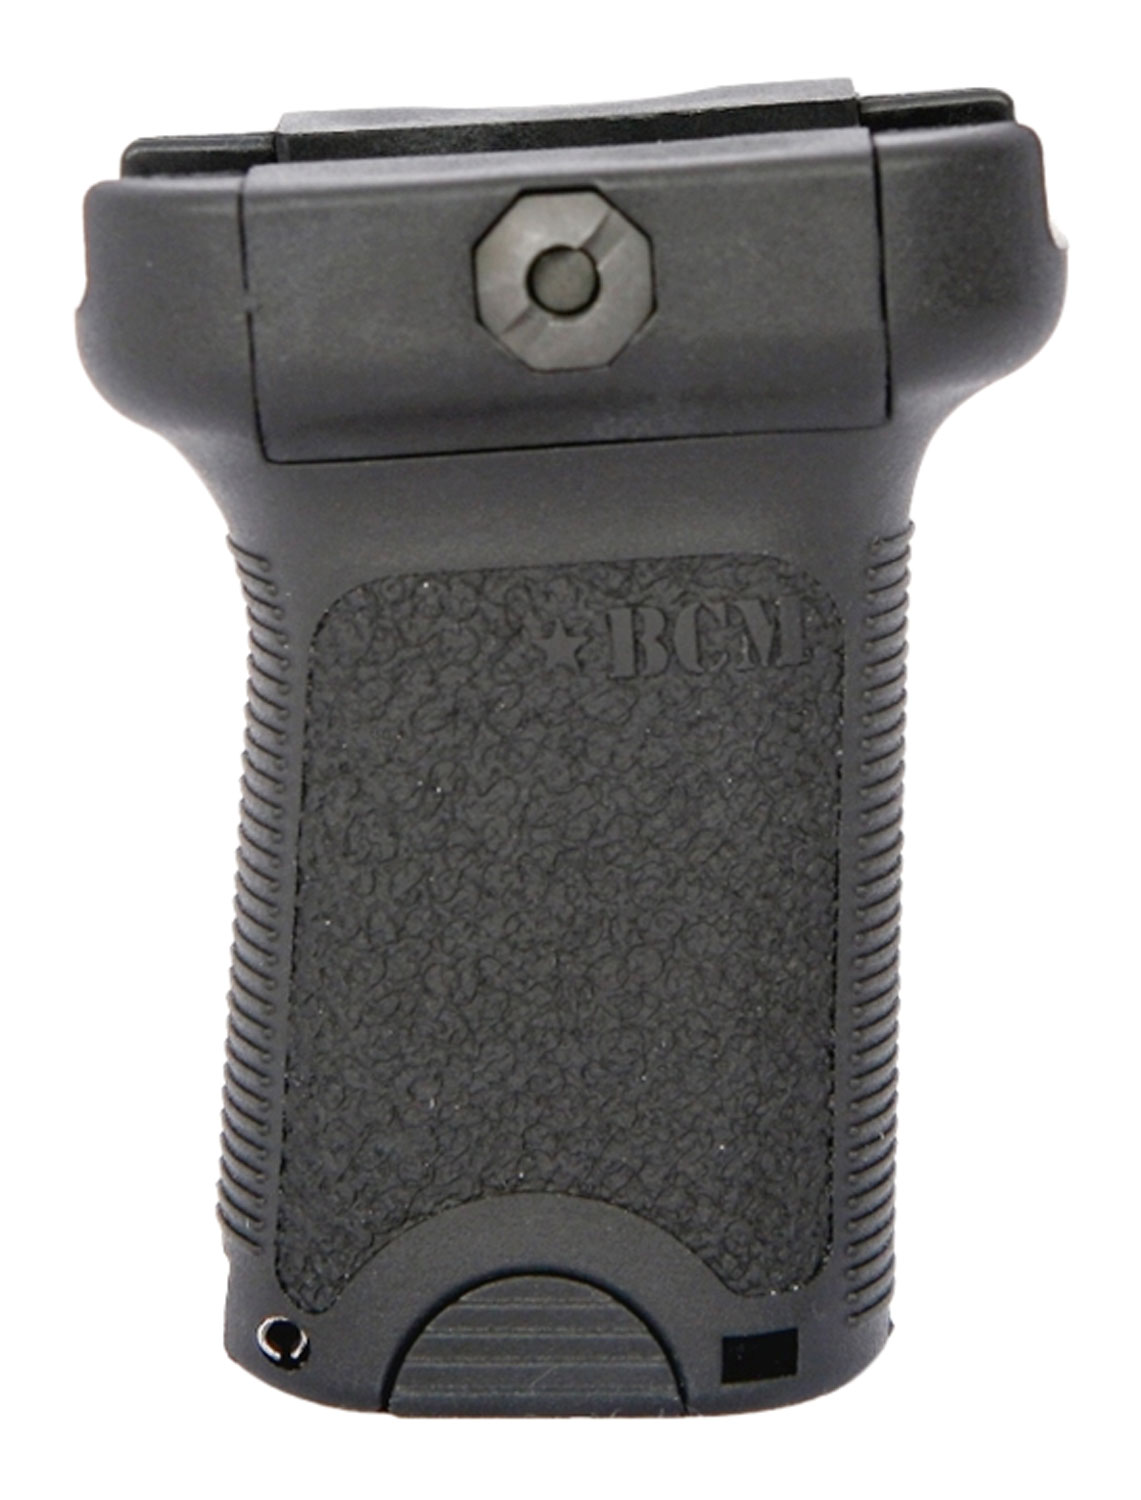 BCM VGSBLK BCMGunfighter Short Vertical Grip Aggressive Texture Black Polymer with Storage Compartment for AR-15